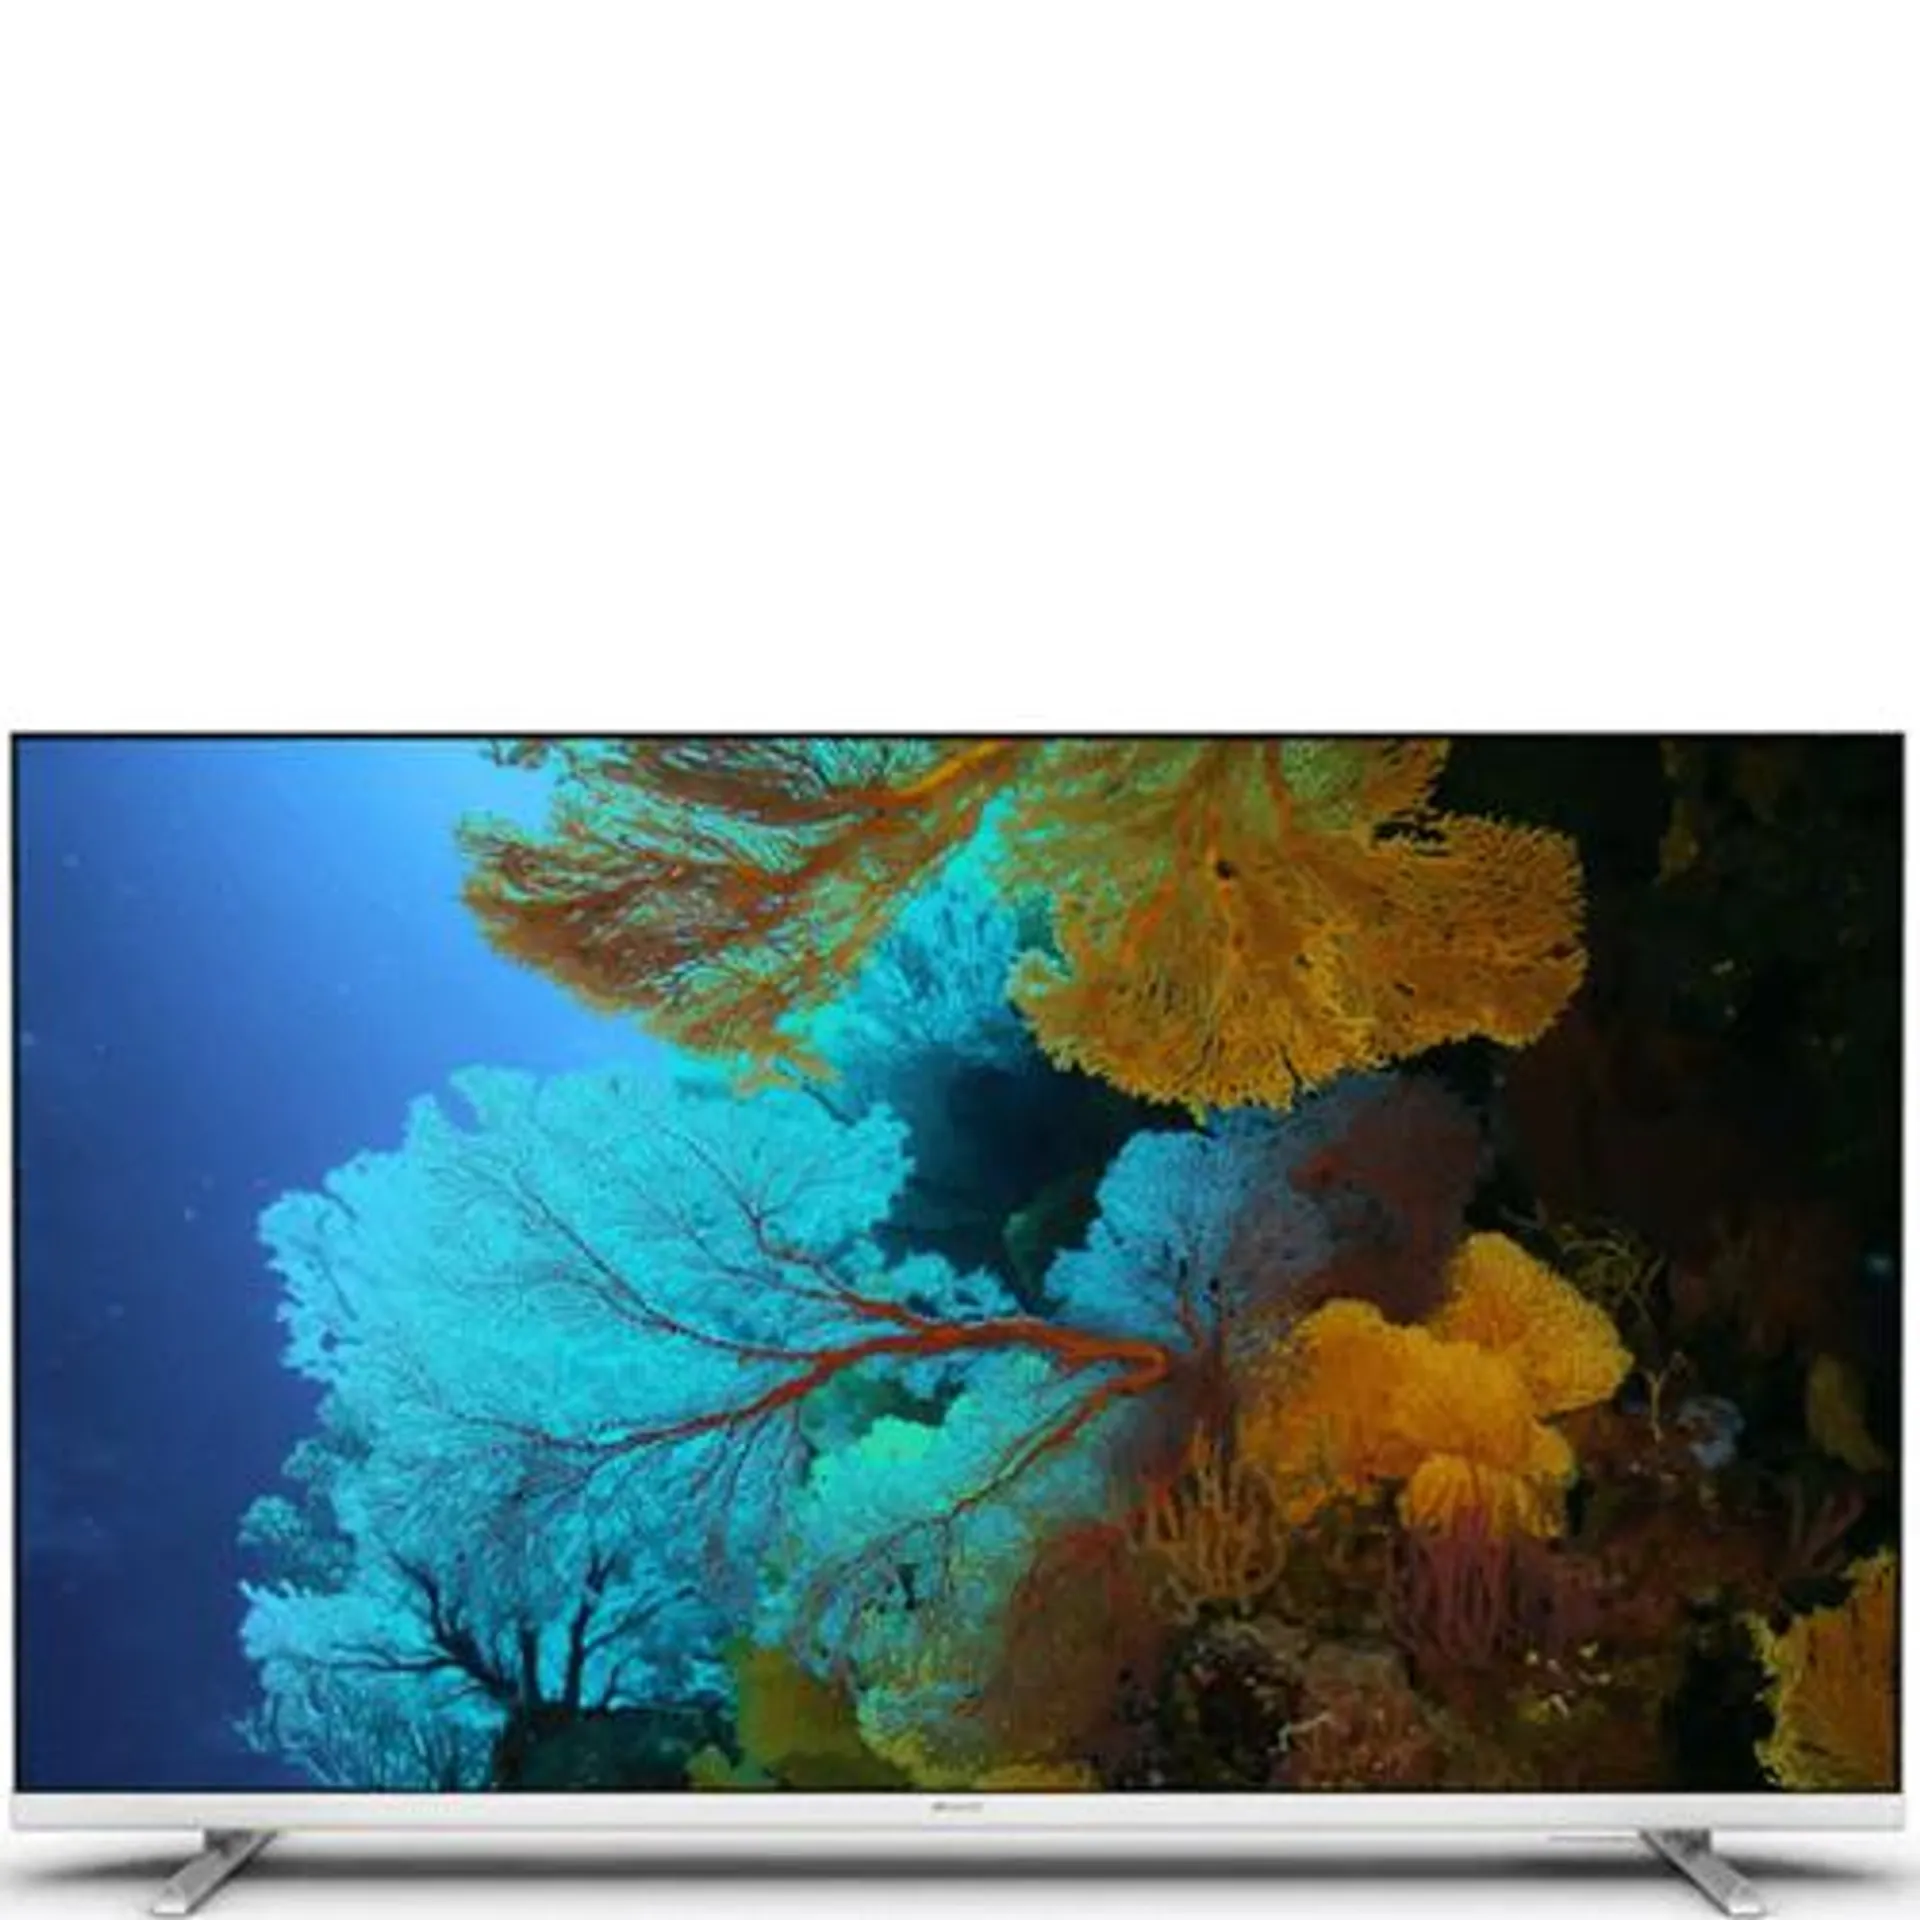 ANDROID TV PHILIPS 32- HD LED BLANCO 32PHD6927